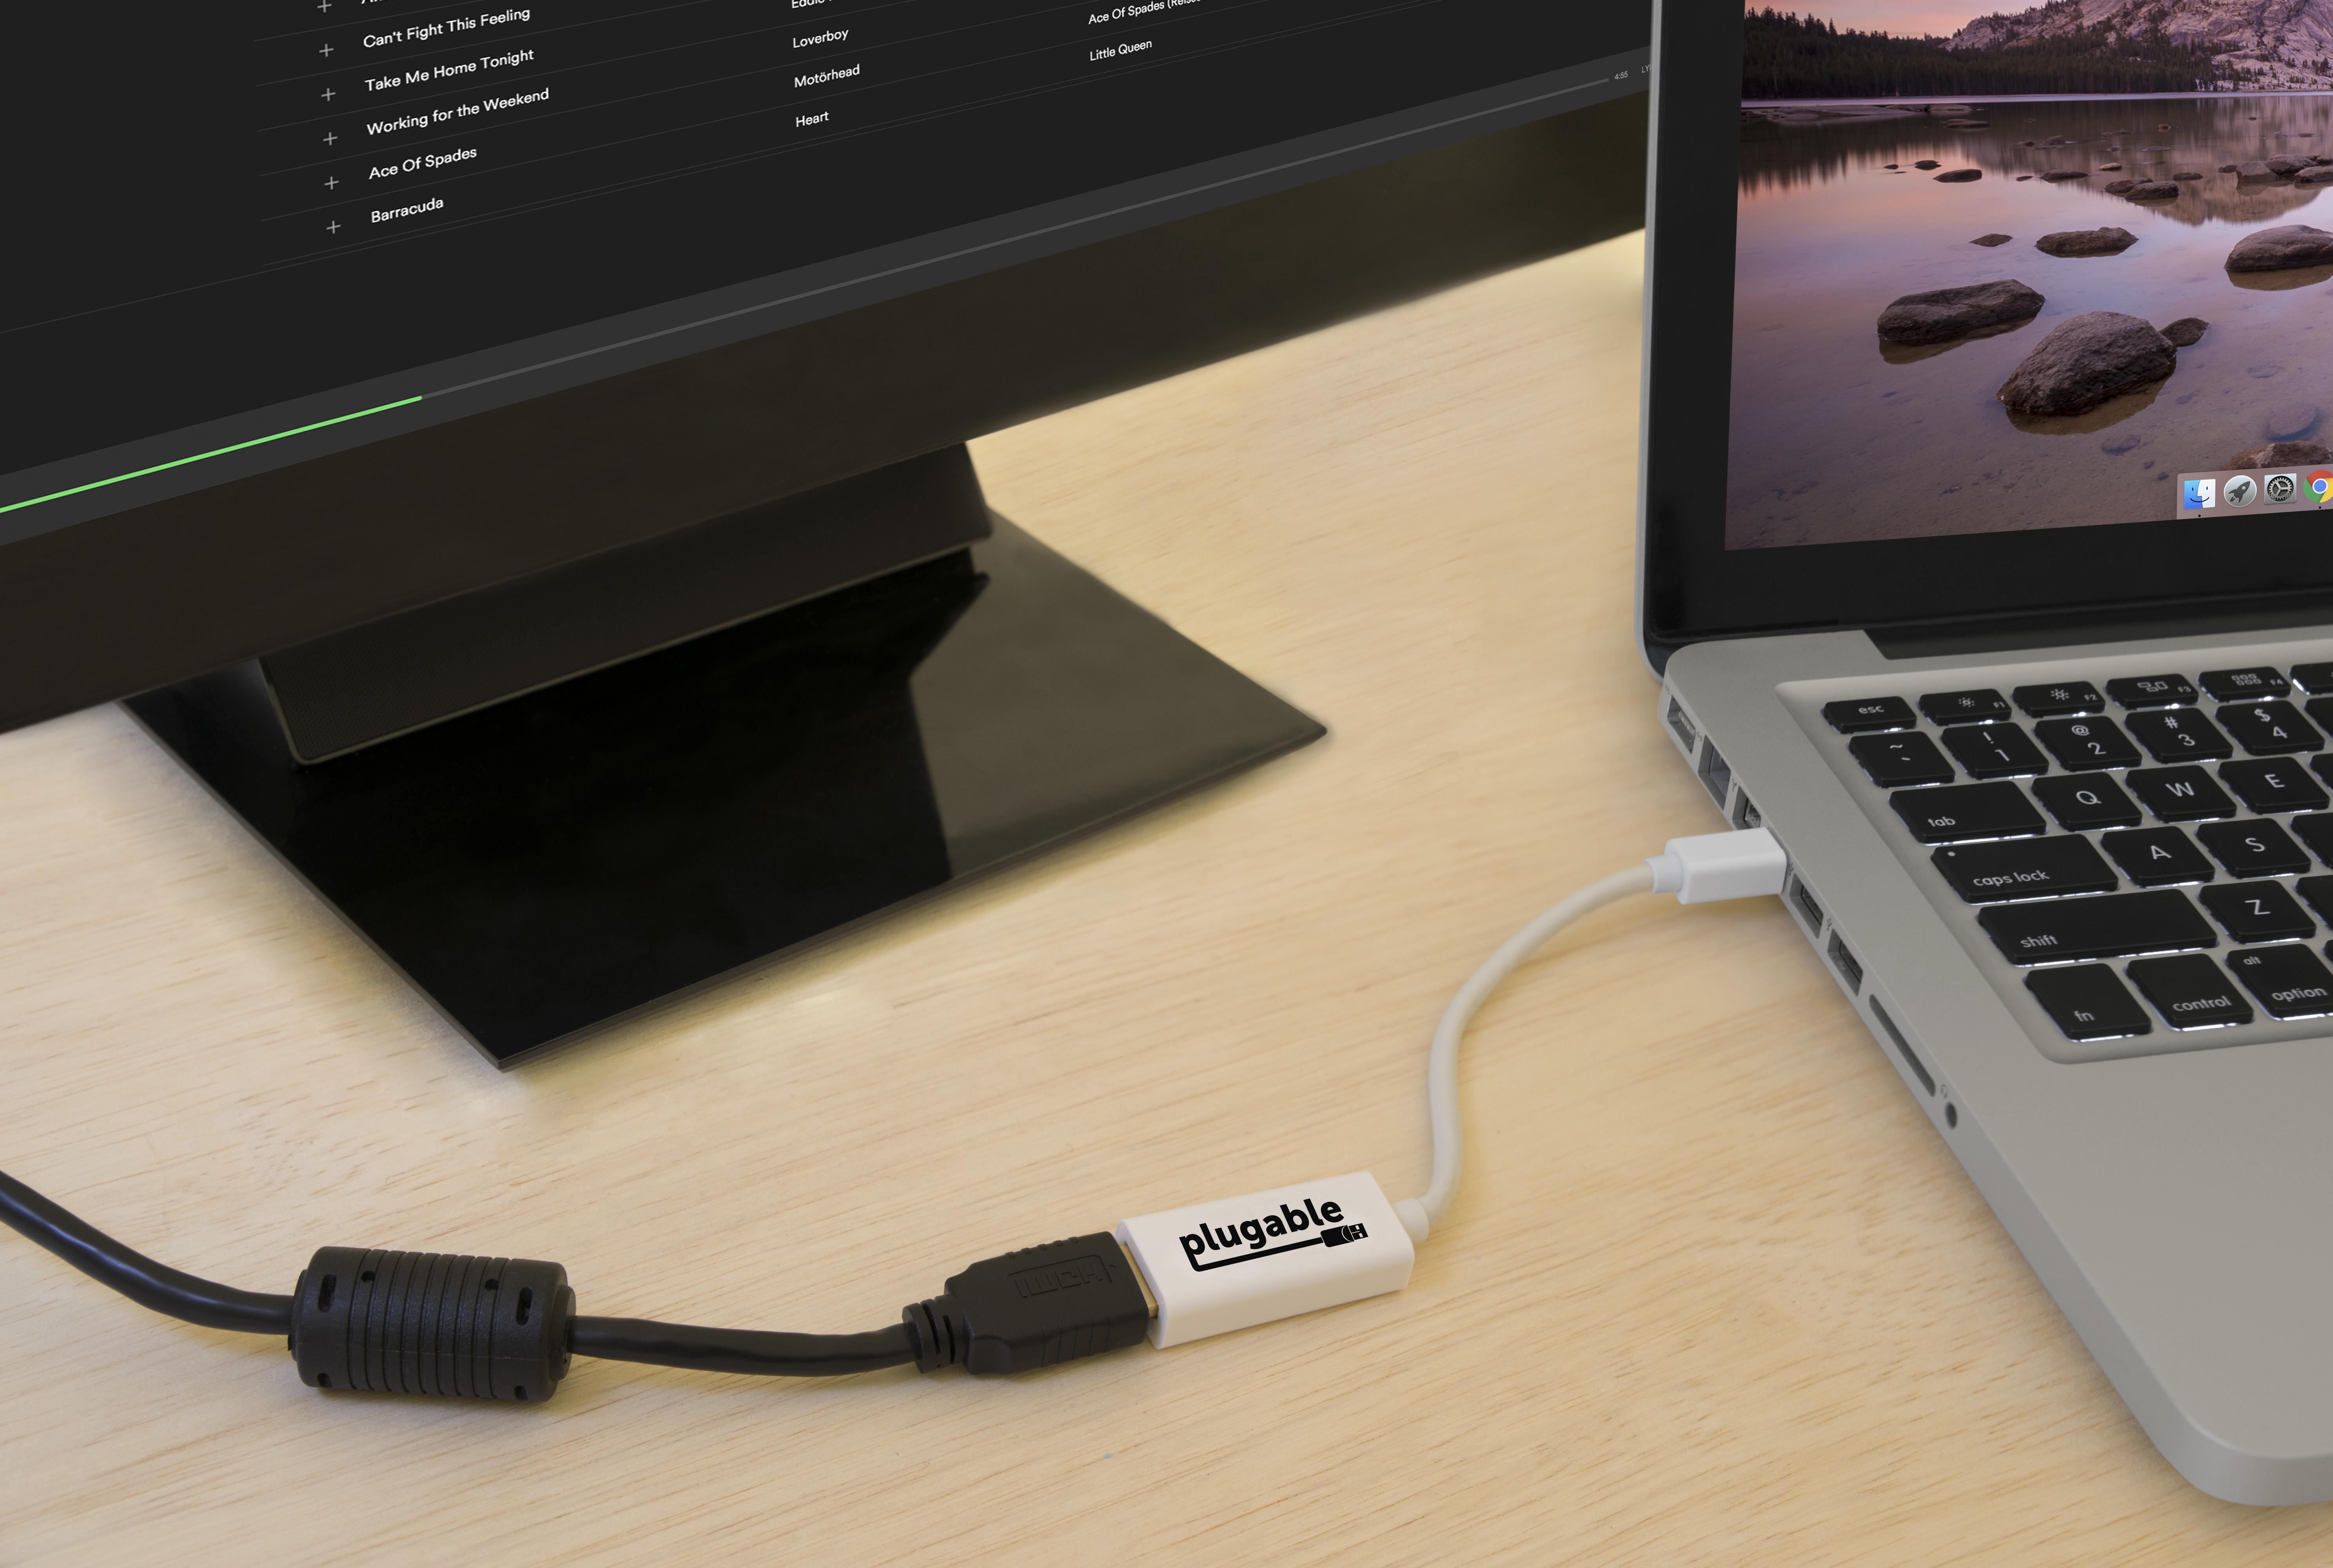 Plugable Mini DisplayPort (Thunderbolt 2) to HDMI Adapter (Supports Mac, Windows, Linux, and Displays up to 4K 3840x2160@30Hz, Passive) - image 2 of 5